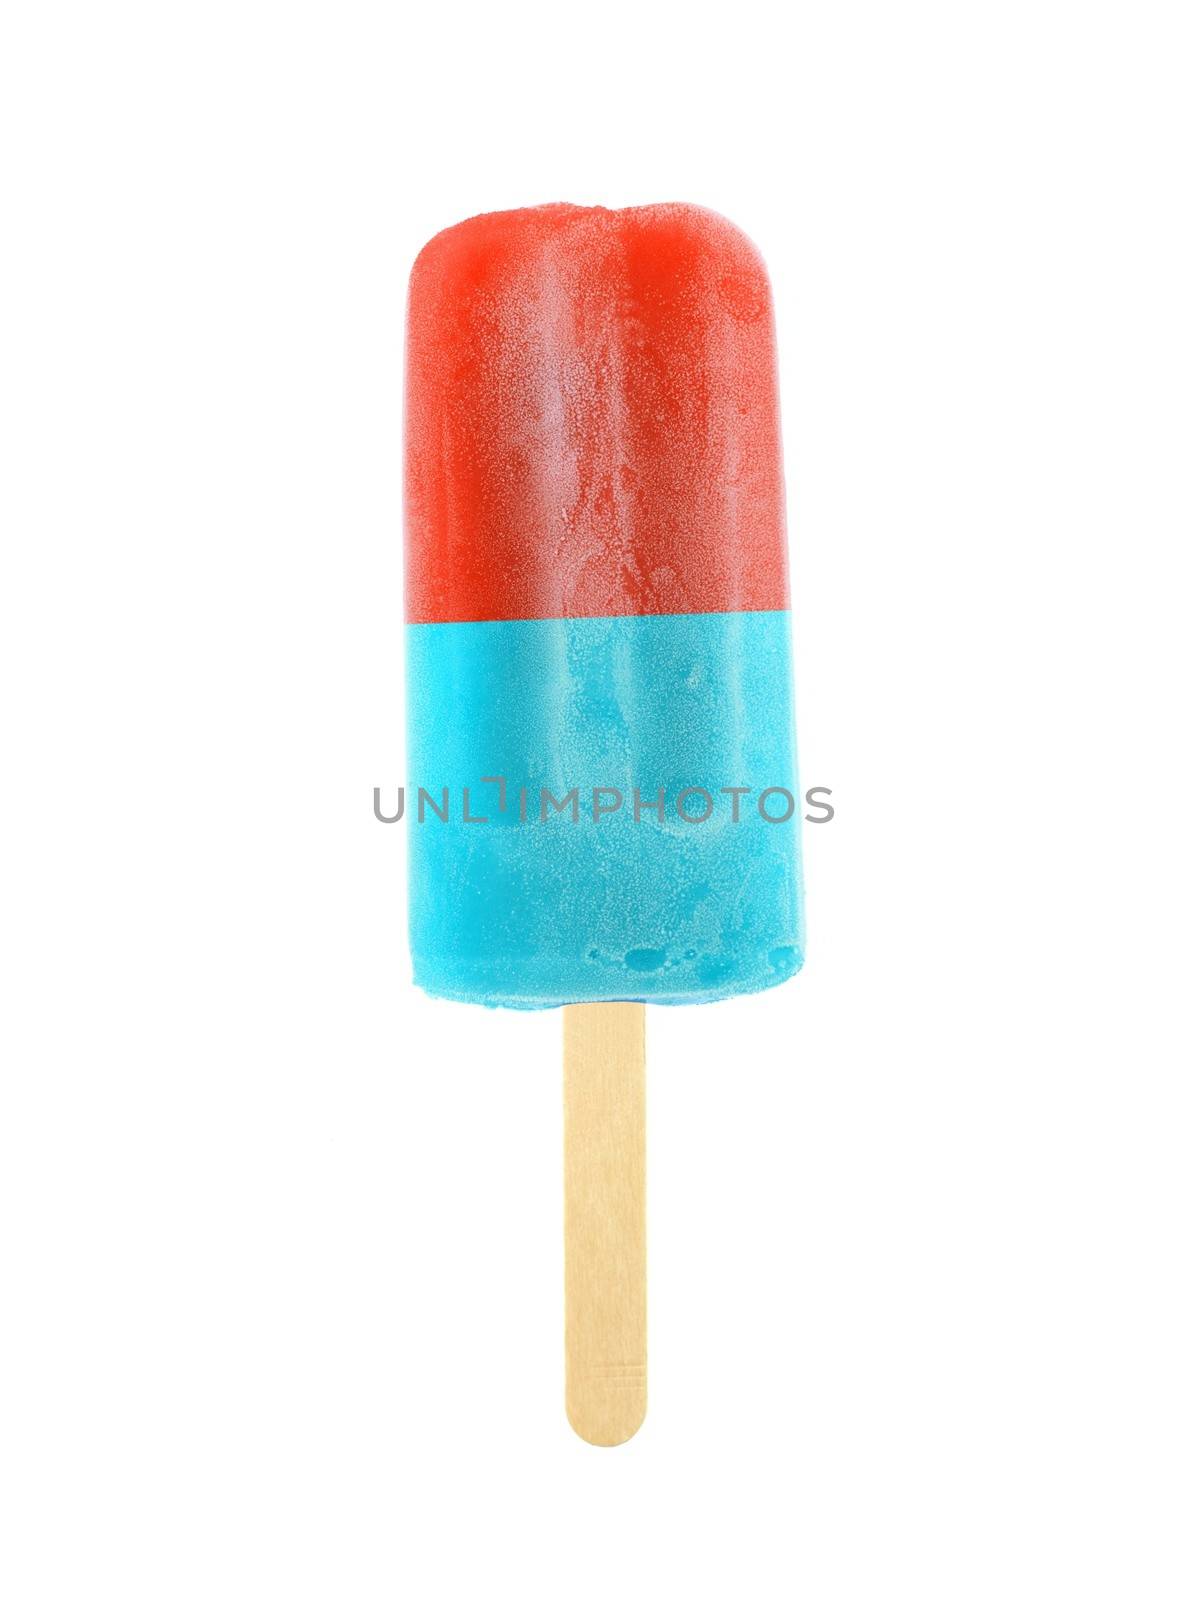 An icecream isolated against a white background